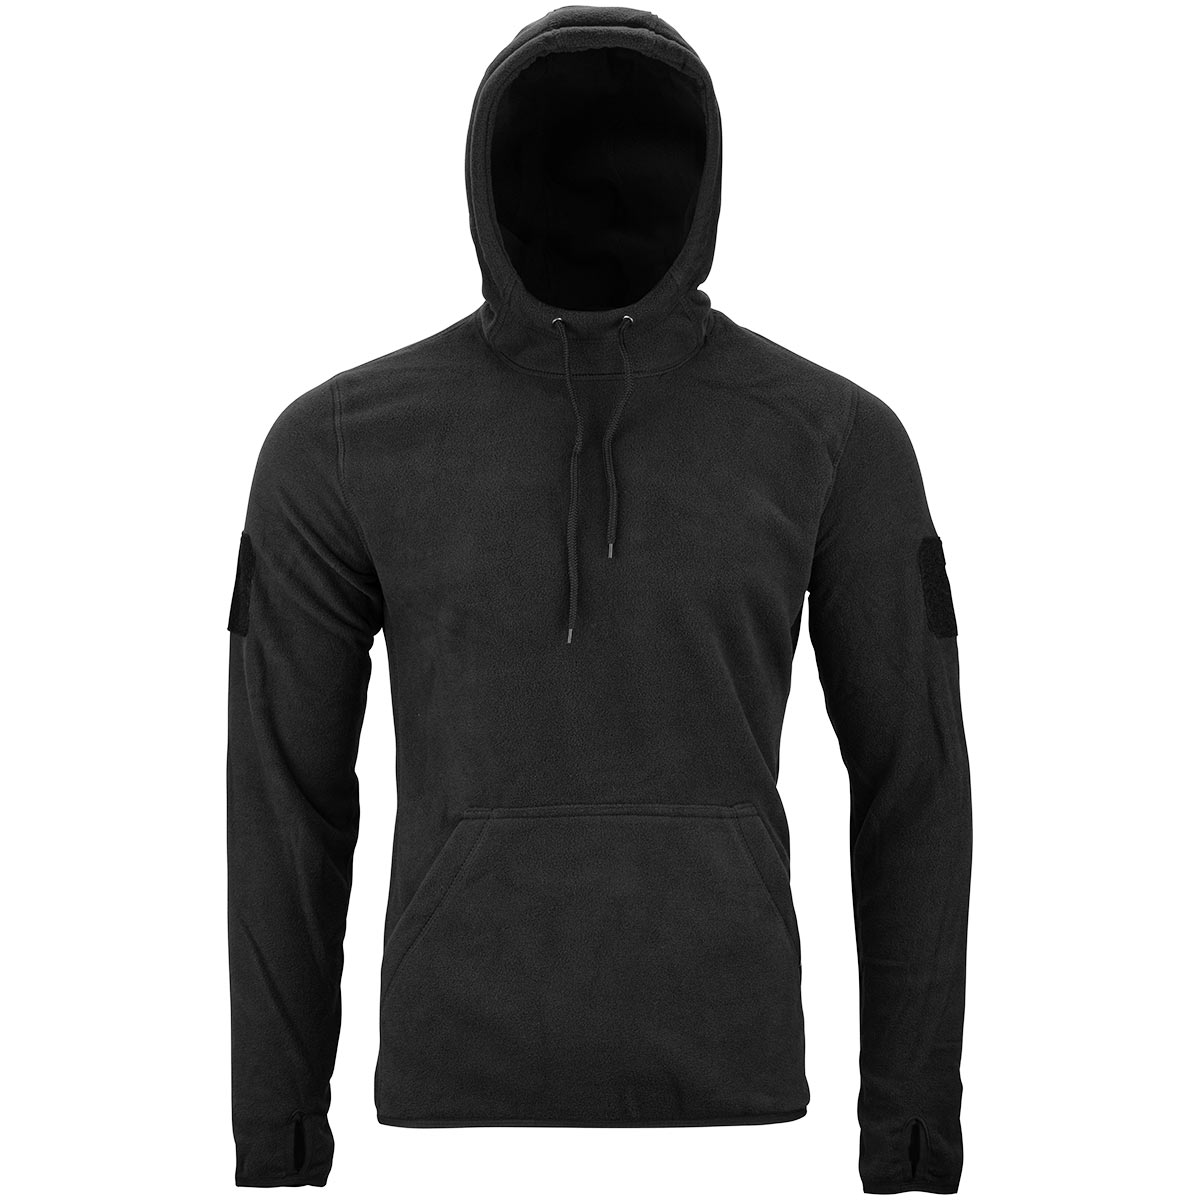 Mens Viper Tactical Fleece Hoodie Military Army Security Warm Thermal ...